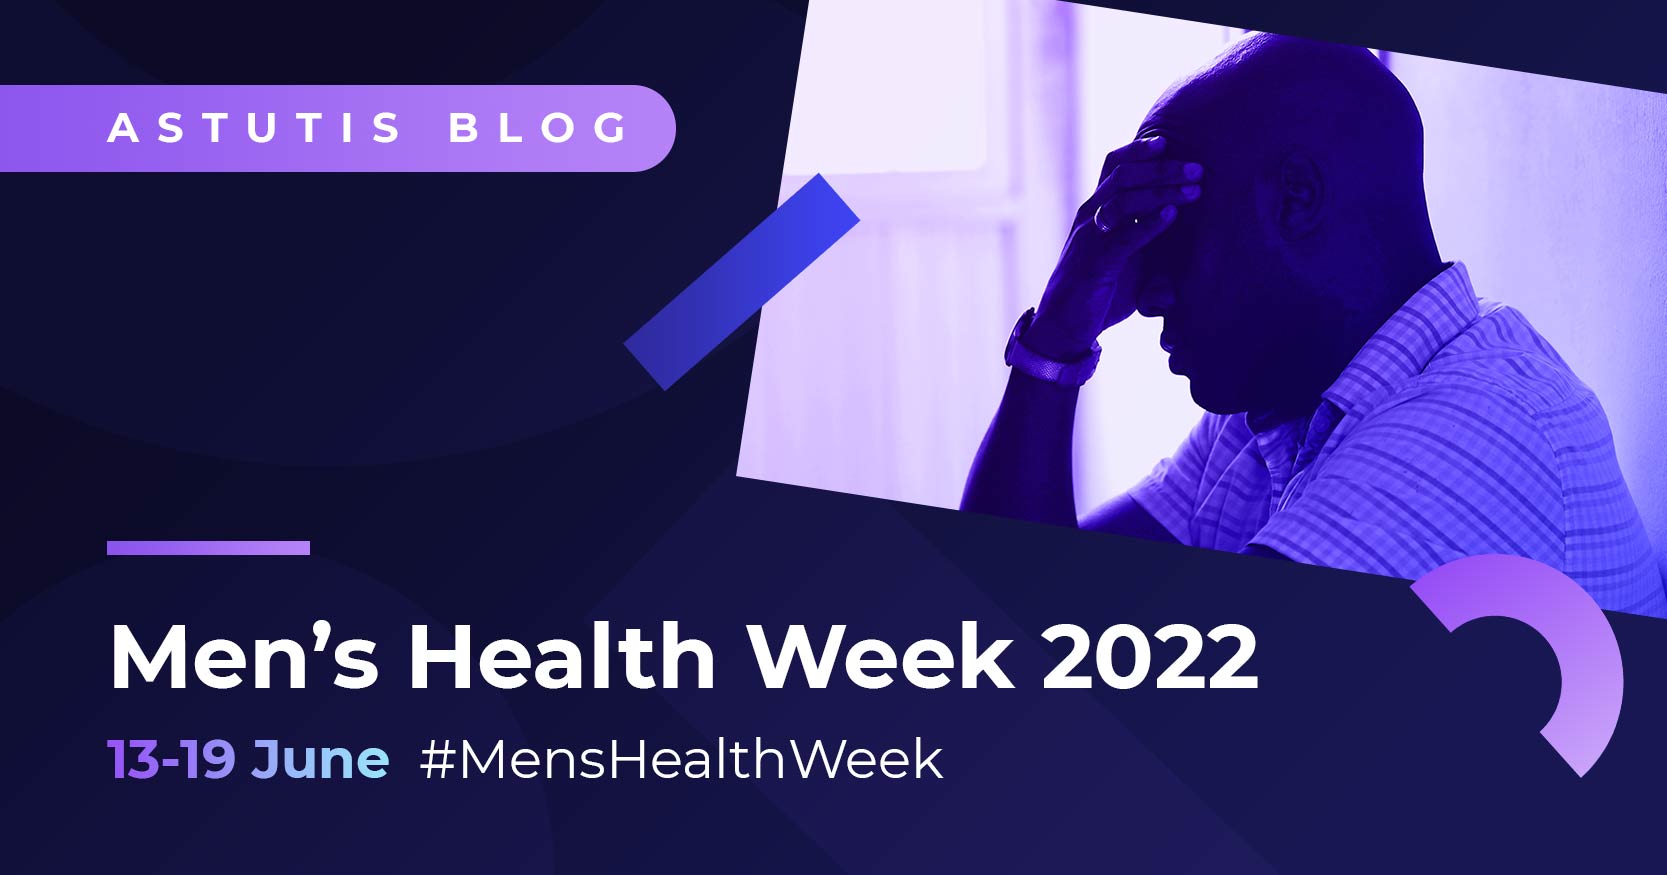 Men's Health Week 2022: How to Help any Man Struggling in Your Life Today! Image